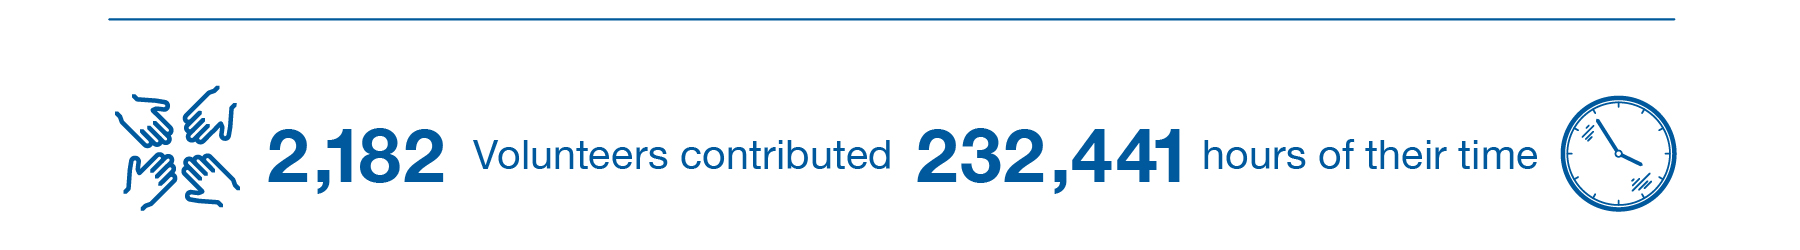 2,182 Volunteers contributed 232,441 hours of their time